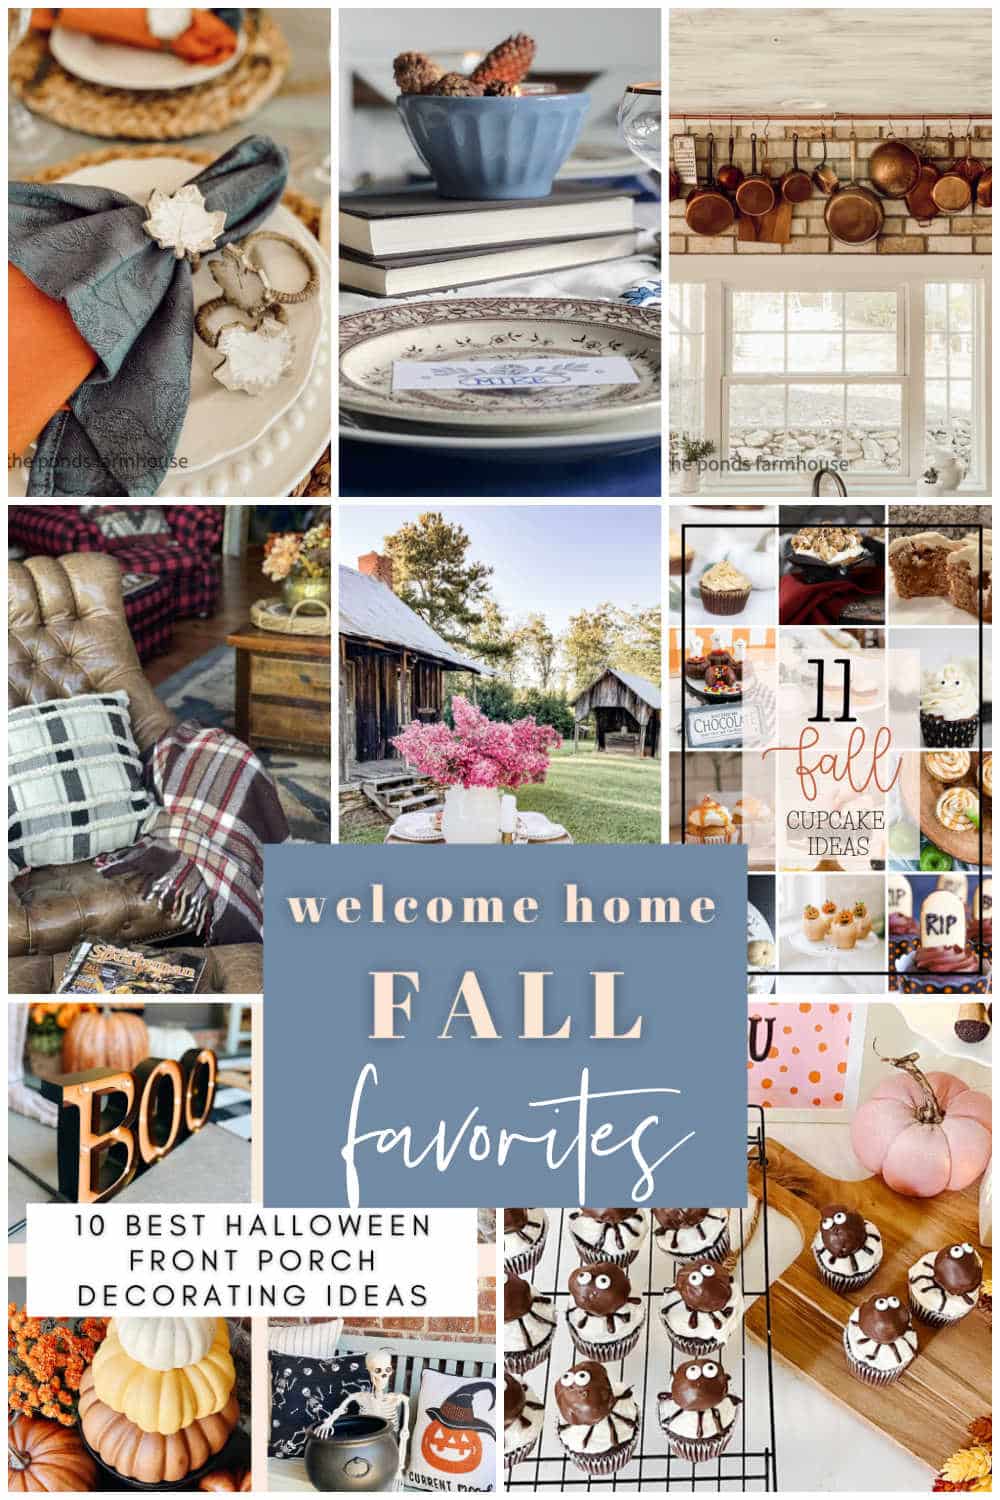 Welcome Home Saturday - October Favorites! The weather is getting cooler, warm up your home with these October DIY Ideas! 